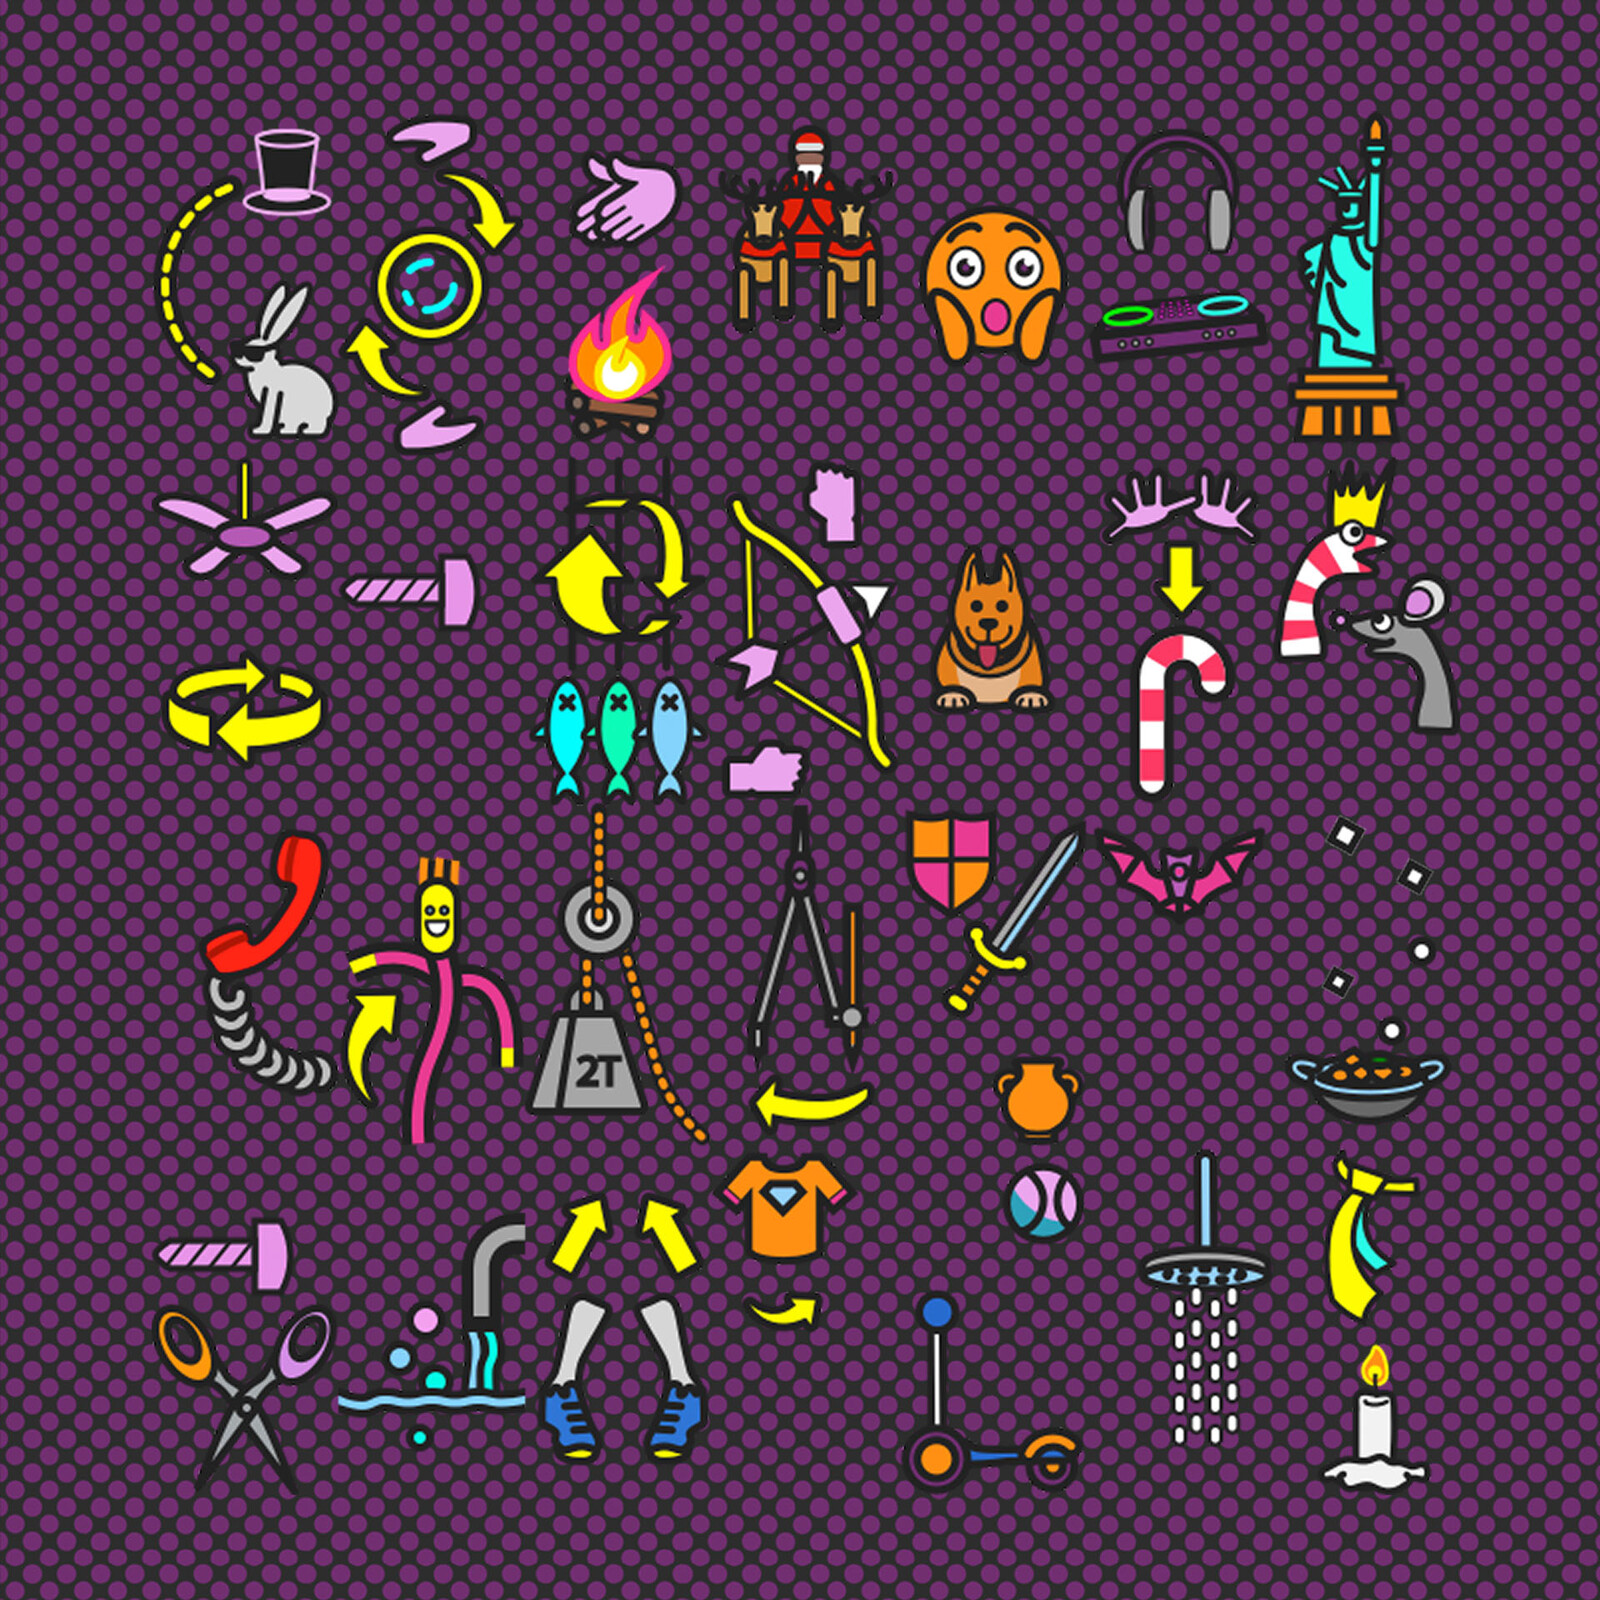 There are about 300 move metaphor icons on the app here are my favorites 